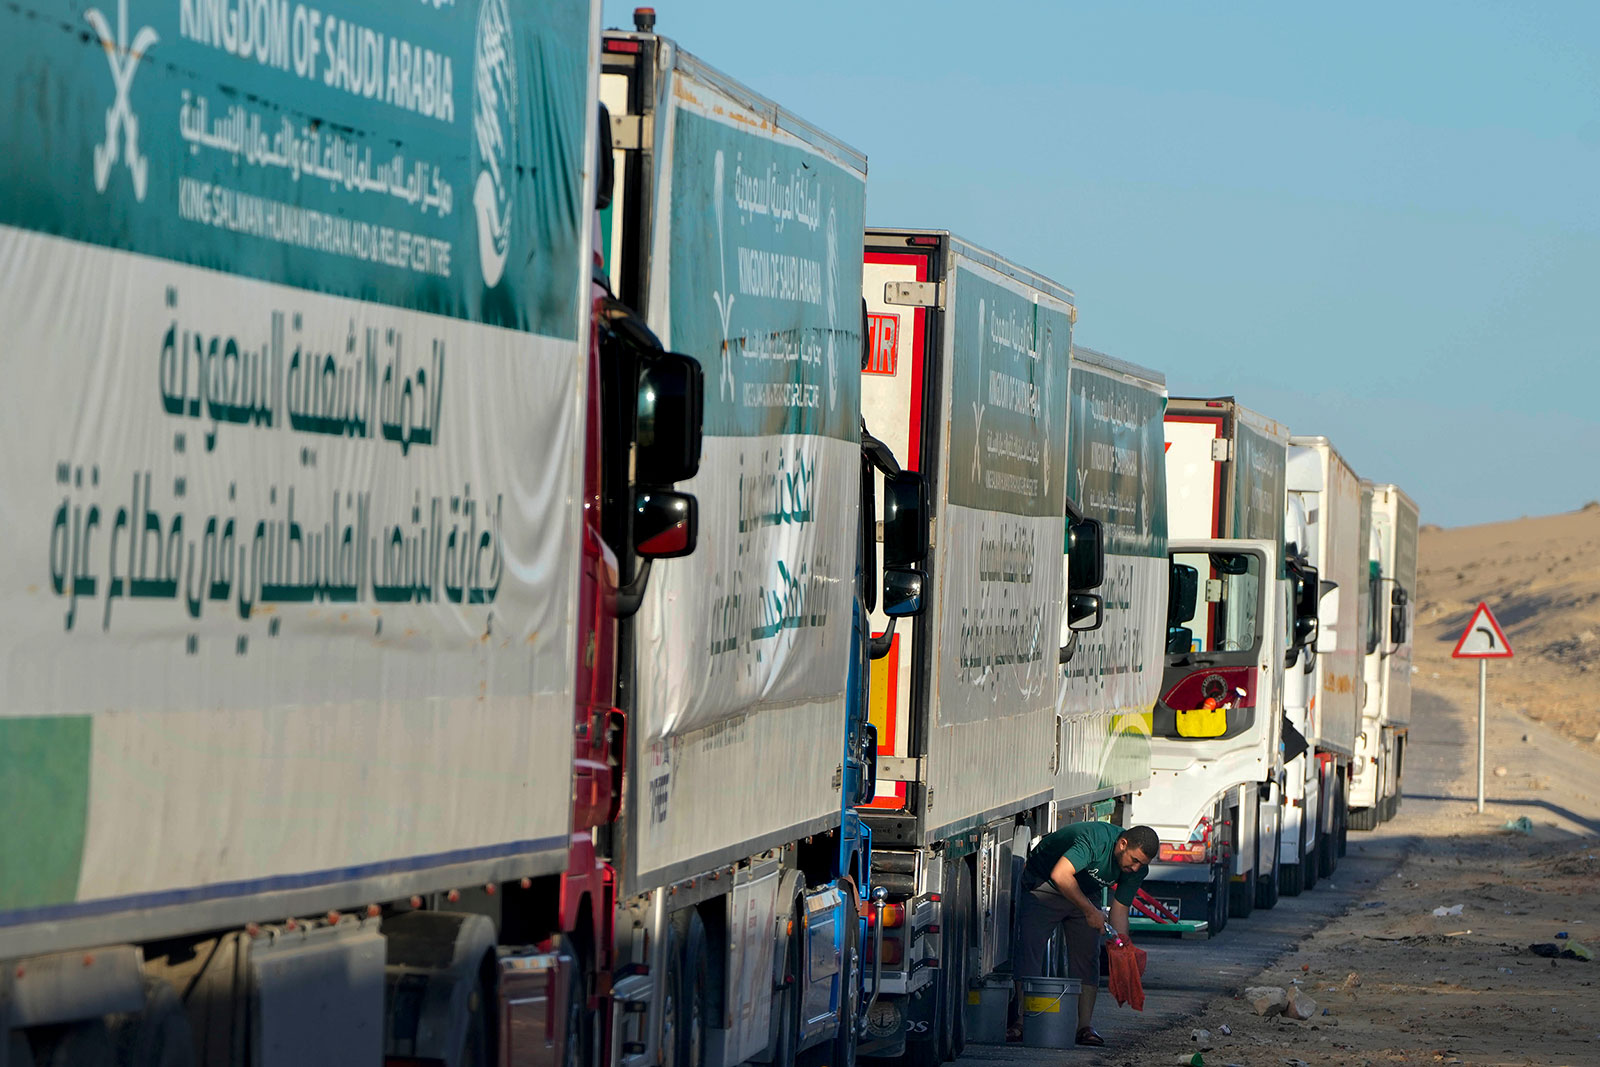 Trucks carrying humanitarian aid line up as they prepare to cross Rafah crossing into Gaza on Wednesday, November 29.